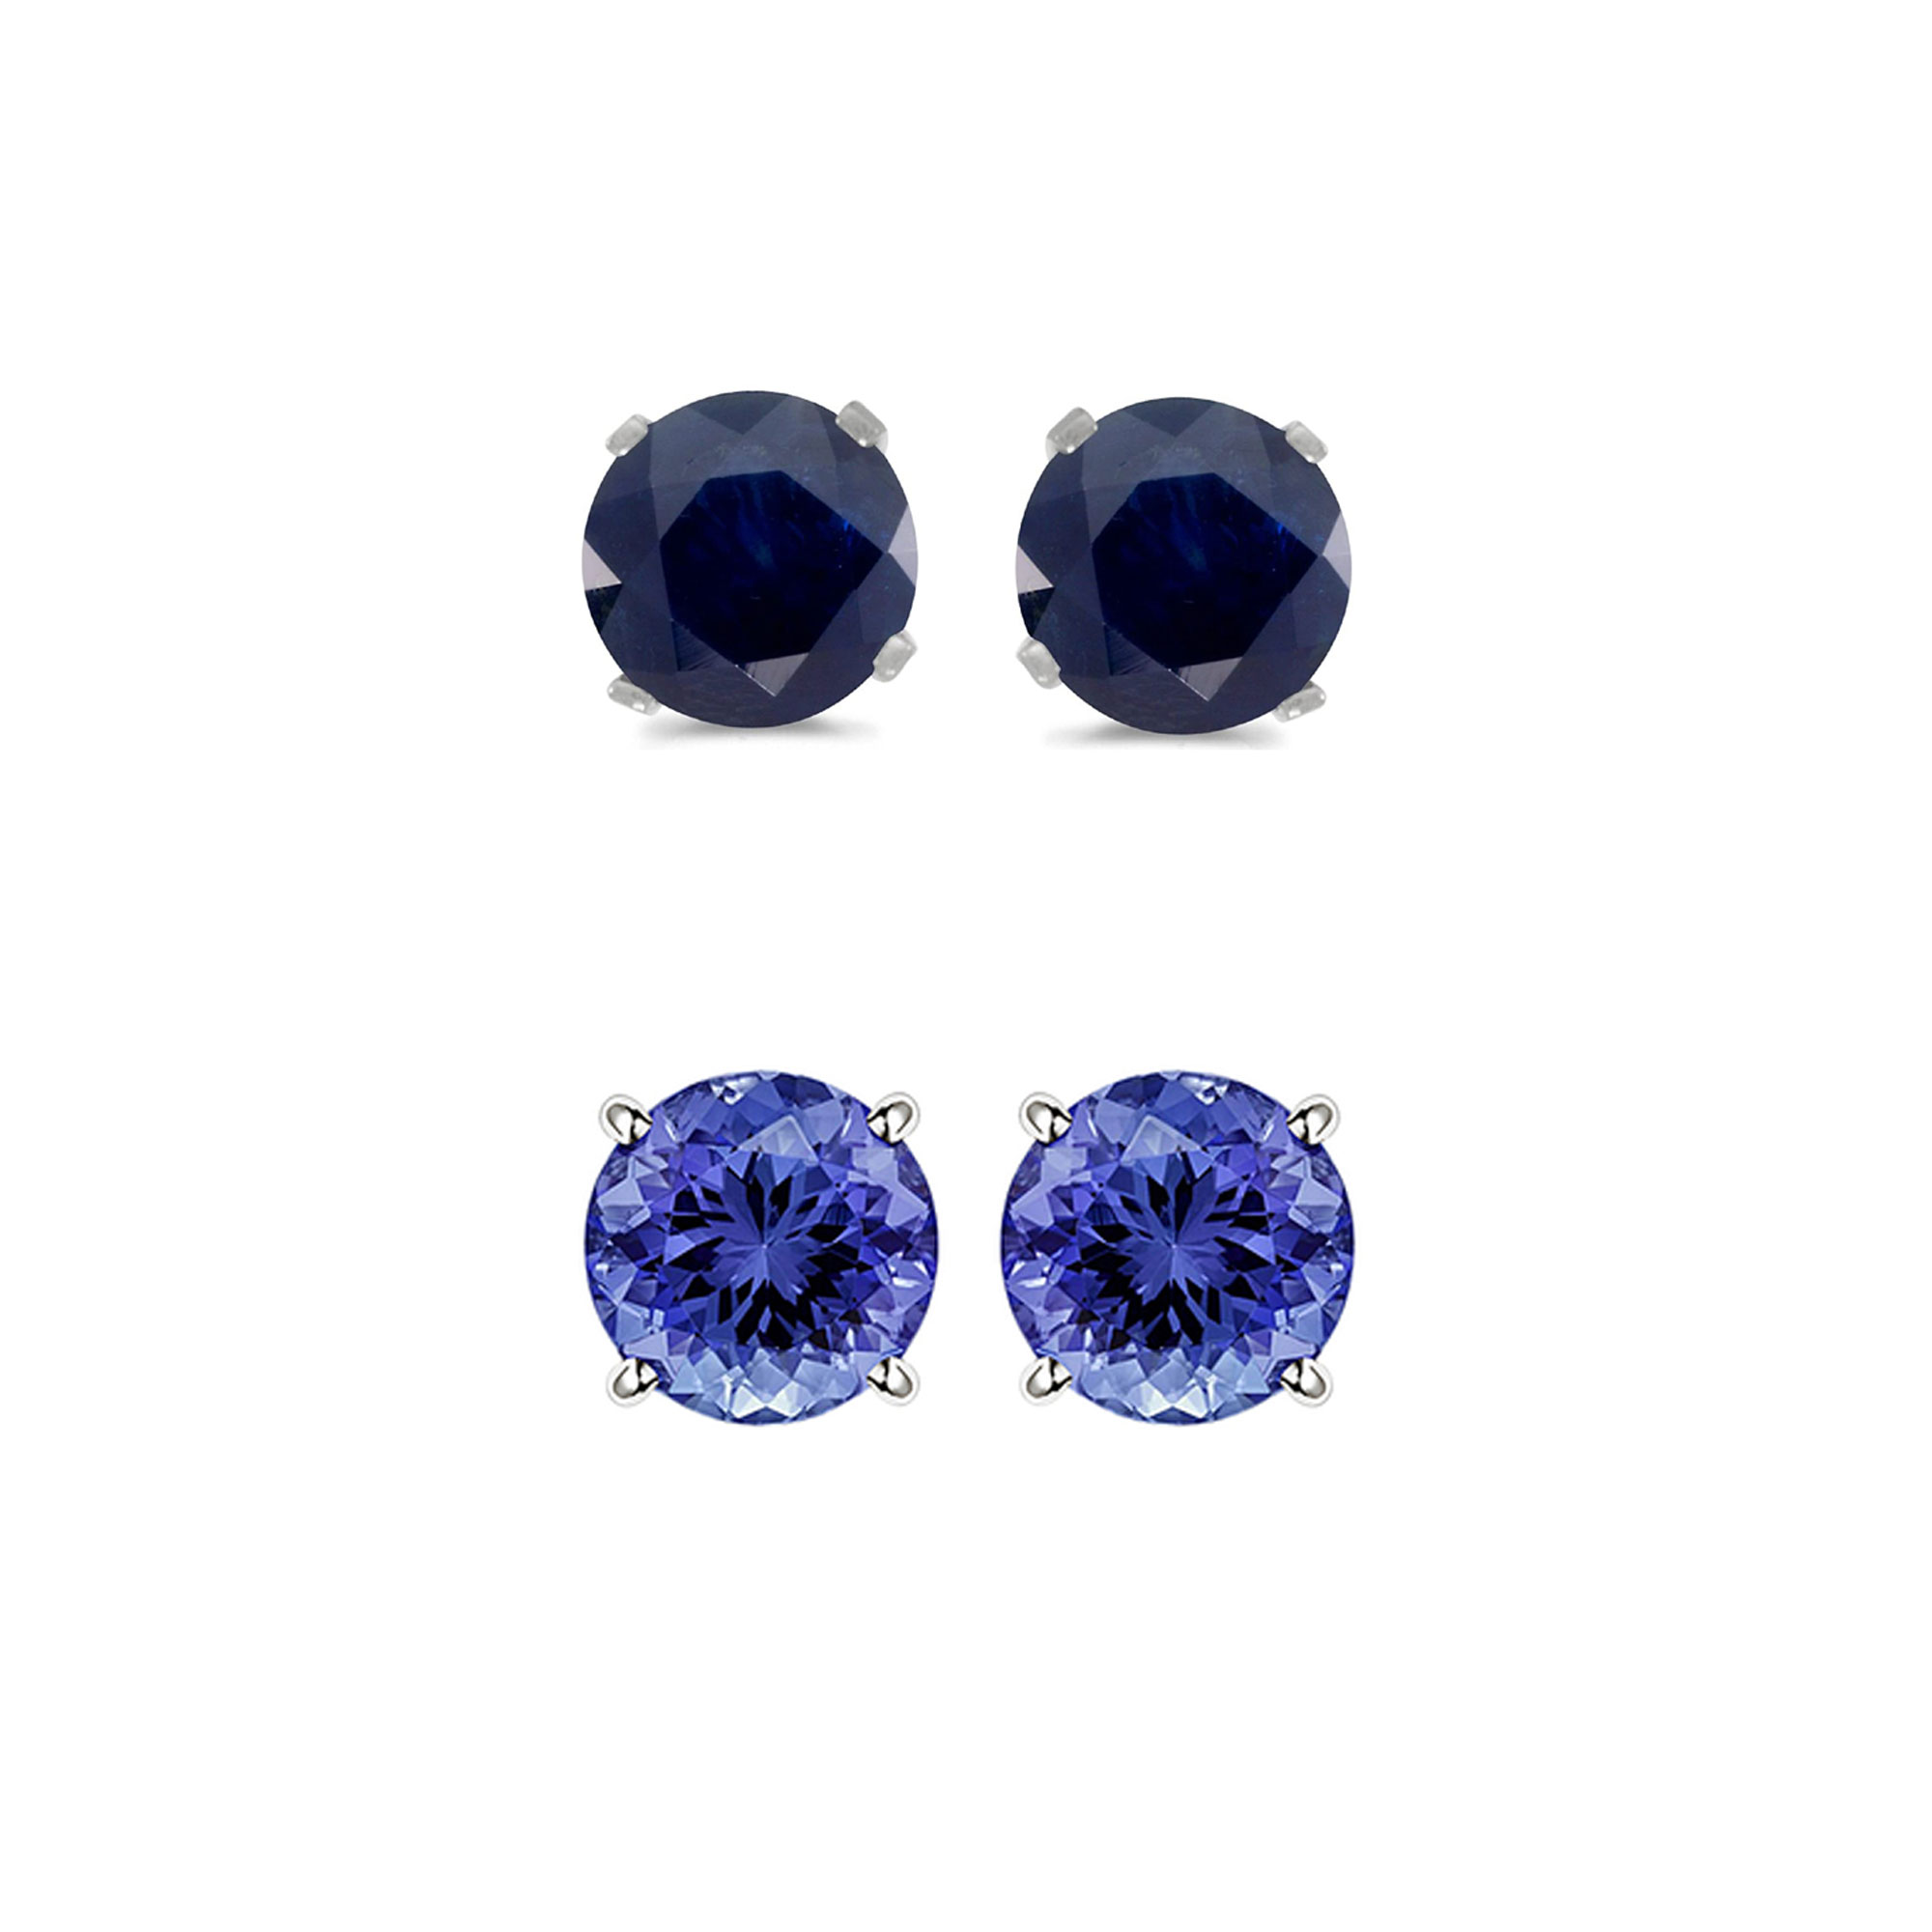 BJ Jewelry 14k White Gold Plated 2Ct Created Black Sapphire and Tanzanite 2 Pair Round Stud Earrings